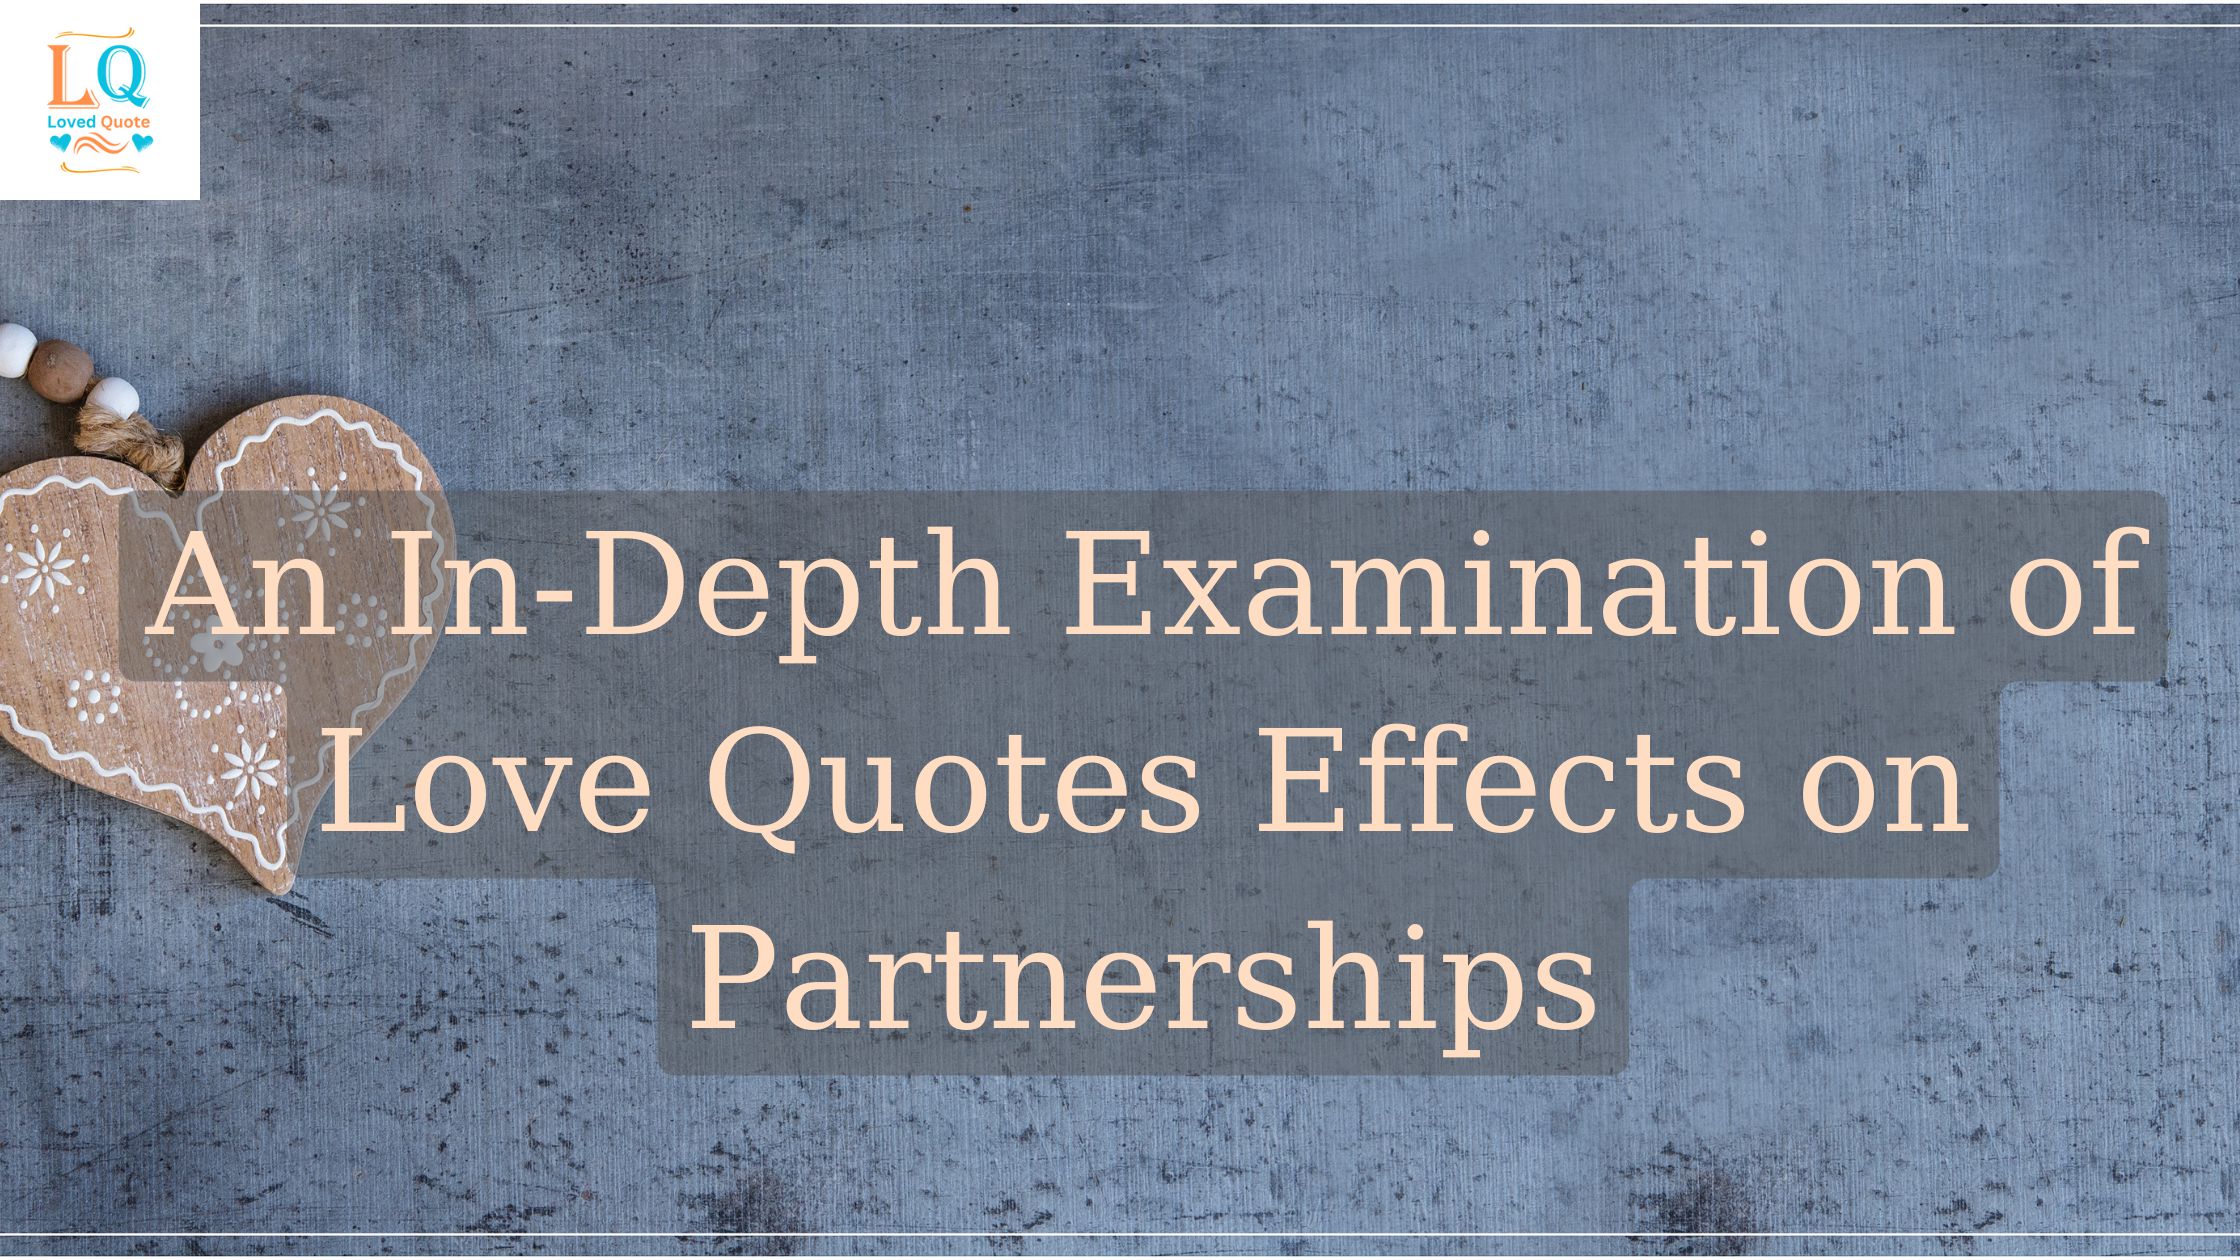 An In-Depth Examination of Love Quotes Effects on Partnerships